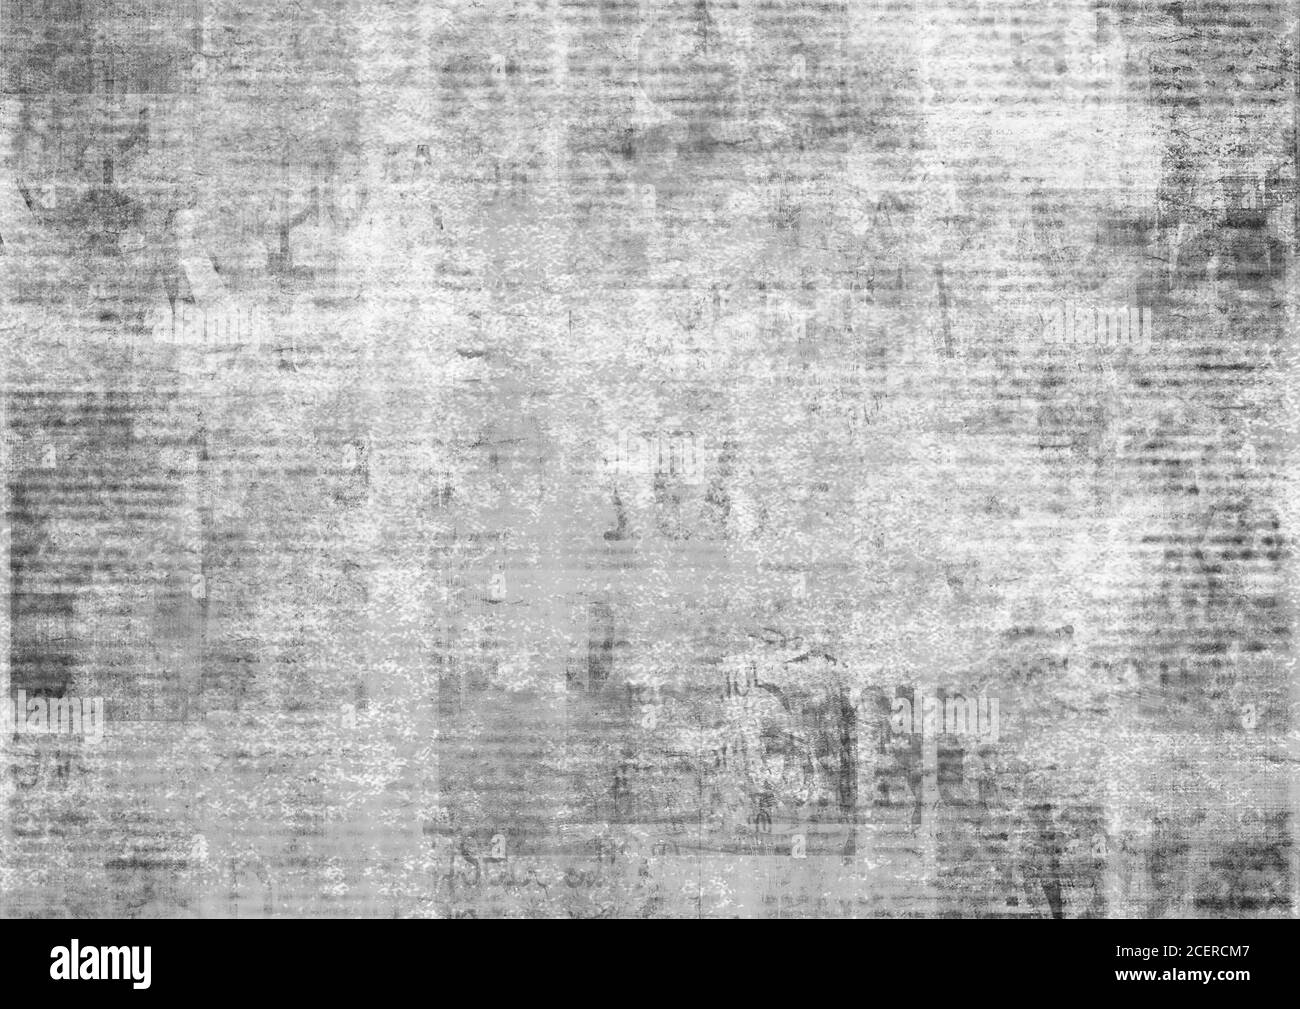 Old grunge newspaper paper textured background. Blurred vintage newspapers texture background. Blur unreadable aged news page with place for text, ima Stock Photo